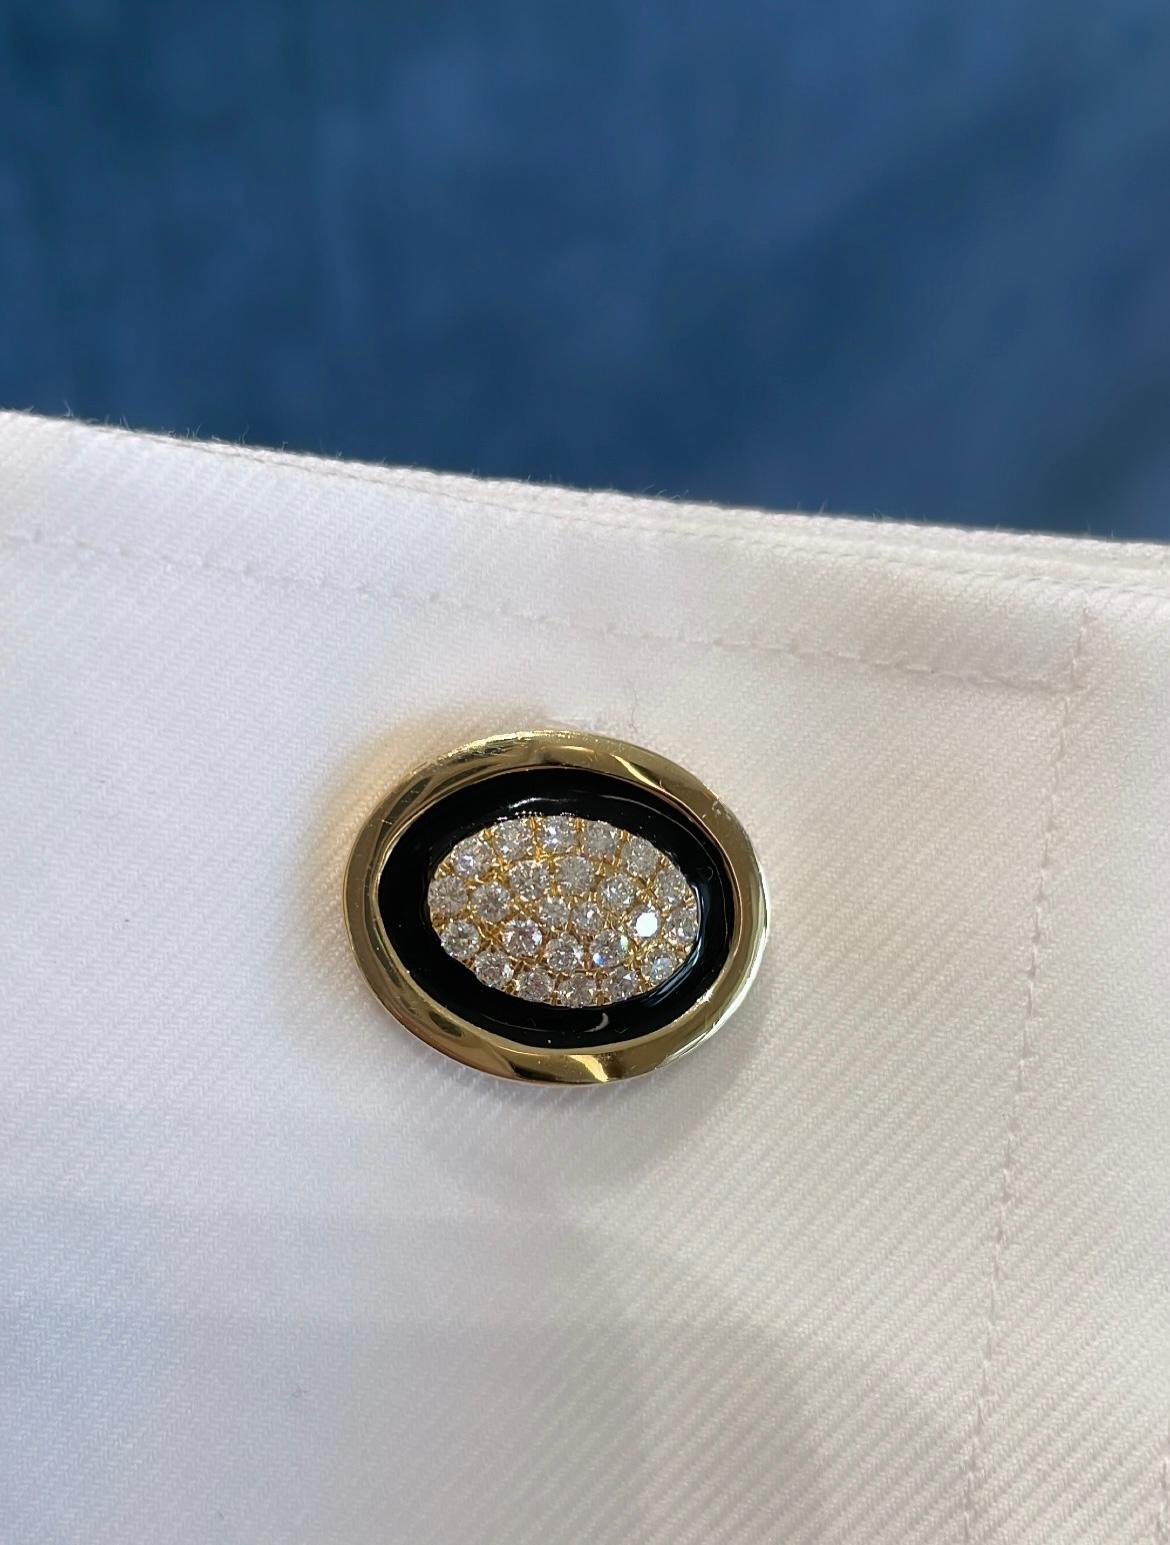 These cufflinks have 48 diamonds totaling in 1.18 carats of diamonds that are surrounded by black onyx and yellow gold creating that perfect balance of color and brilliance. They are very sharp and perfect for any occasion. It is a cufflink you will